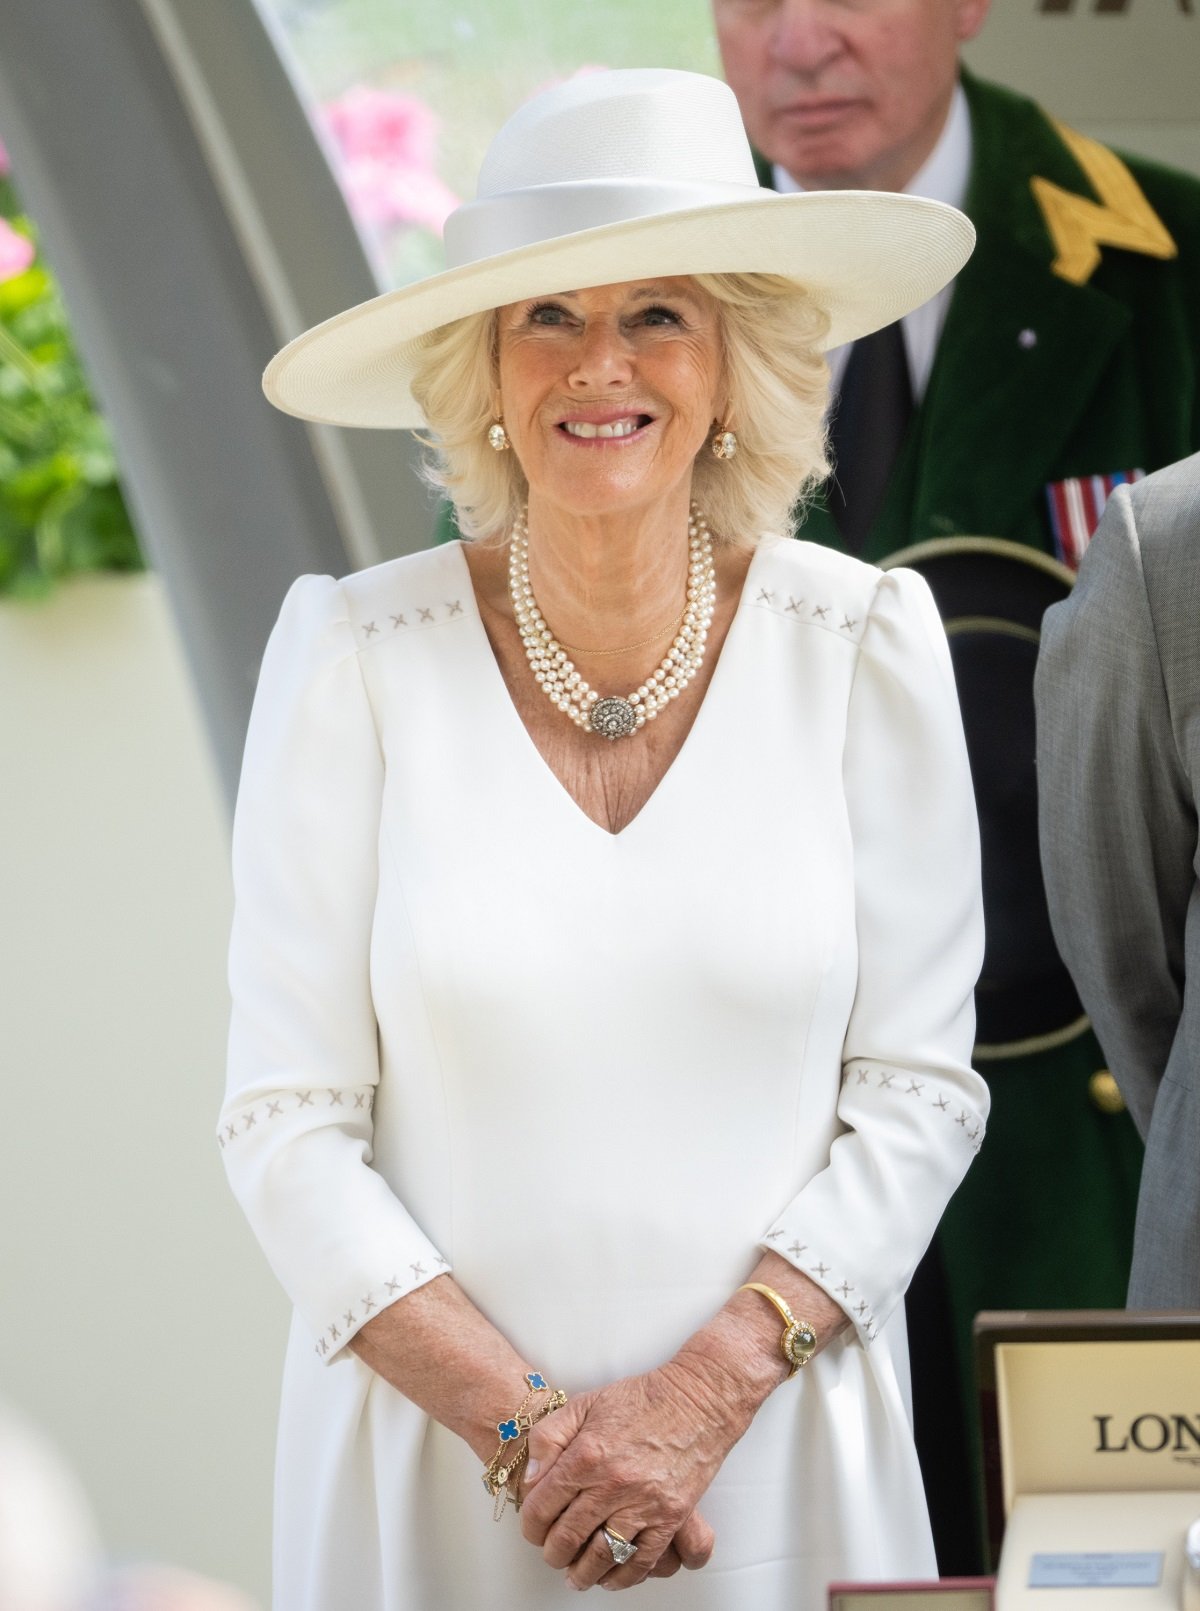 Camilla Parker Bowles attends Day 2 Royal Ascot at Ascot Racecourse